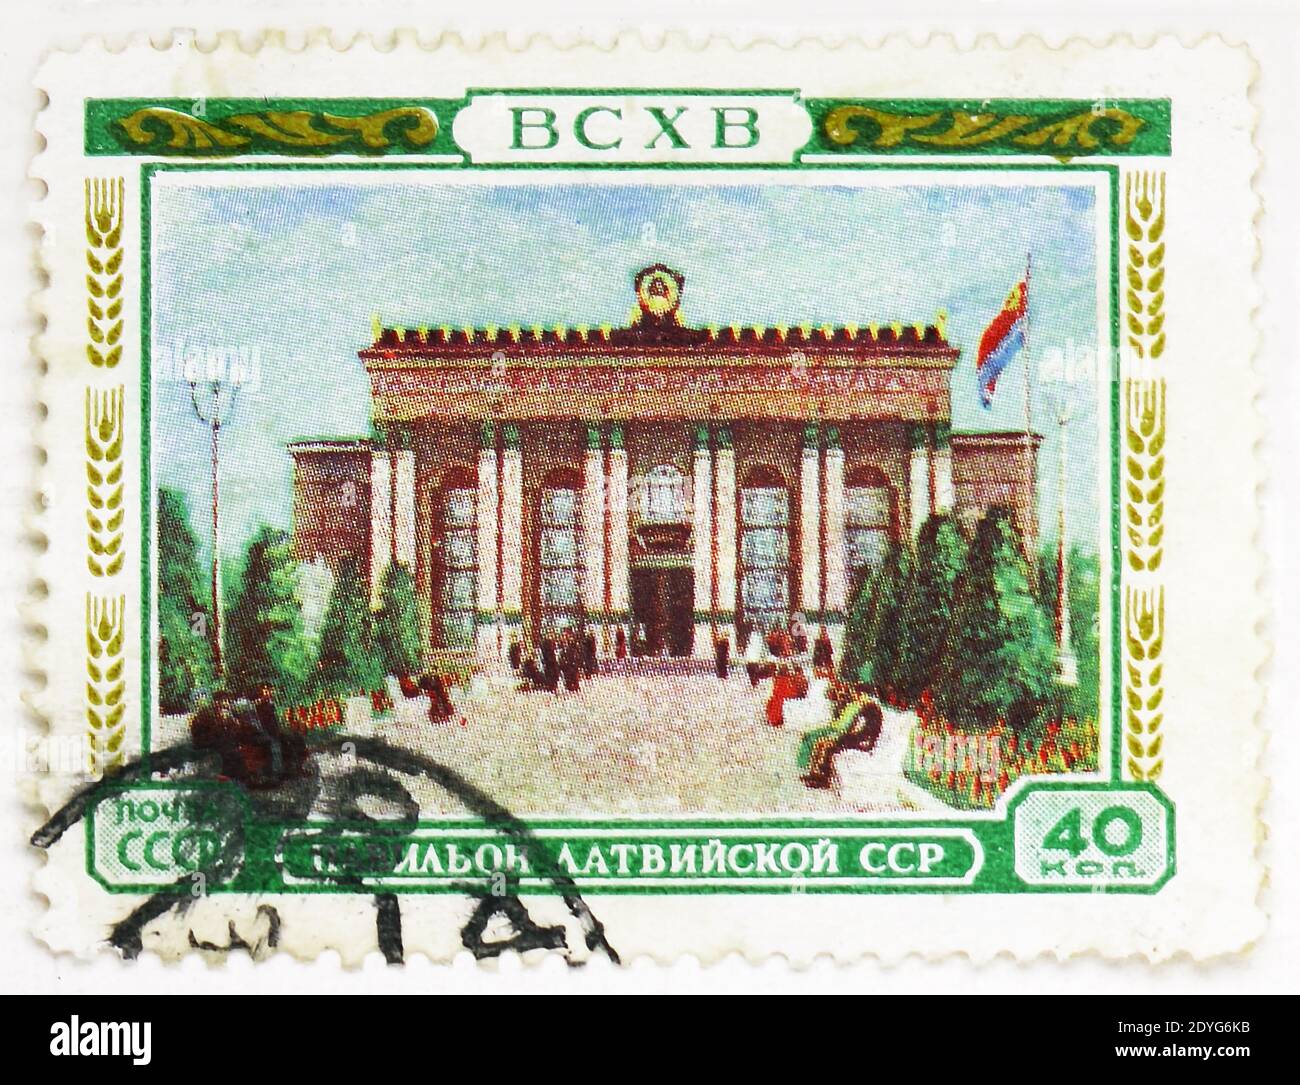 MOSCOW, RUSSIA - AUGUST 4, 2019: Postage stamp printed in Soviet Union (Russia) shows Pavillon of the Latvian SSR, All-Union Agricultural Exhibition ( Stock Photo